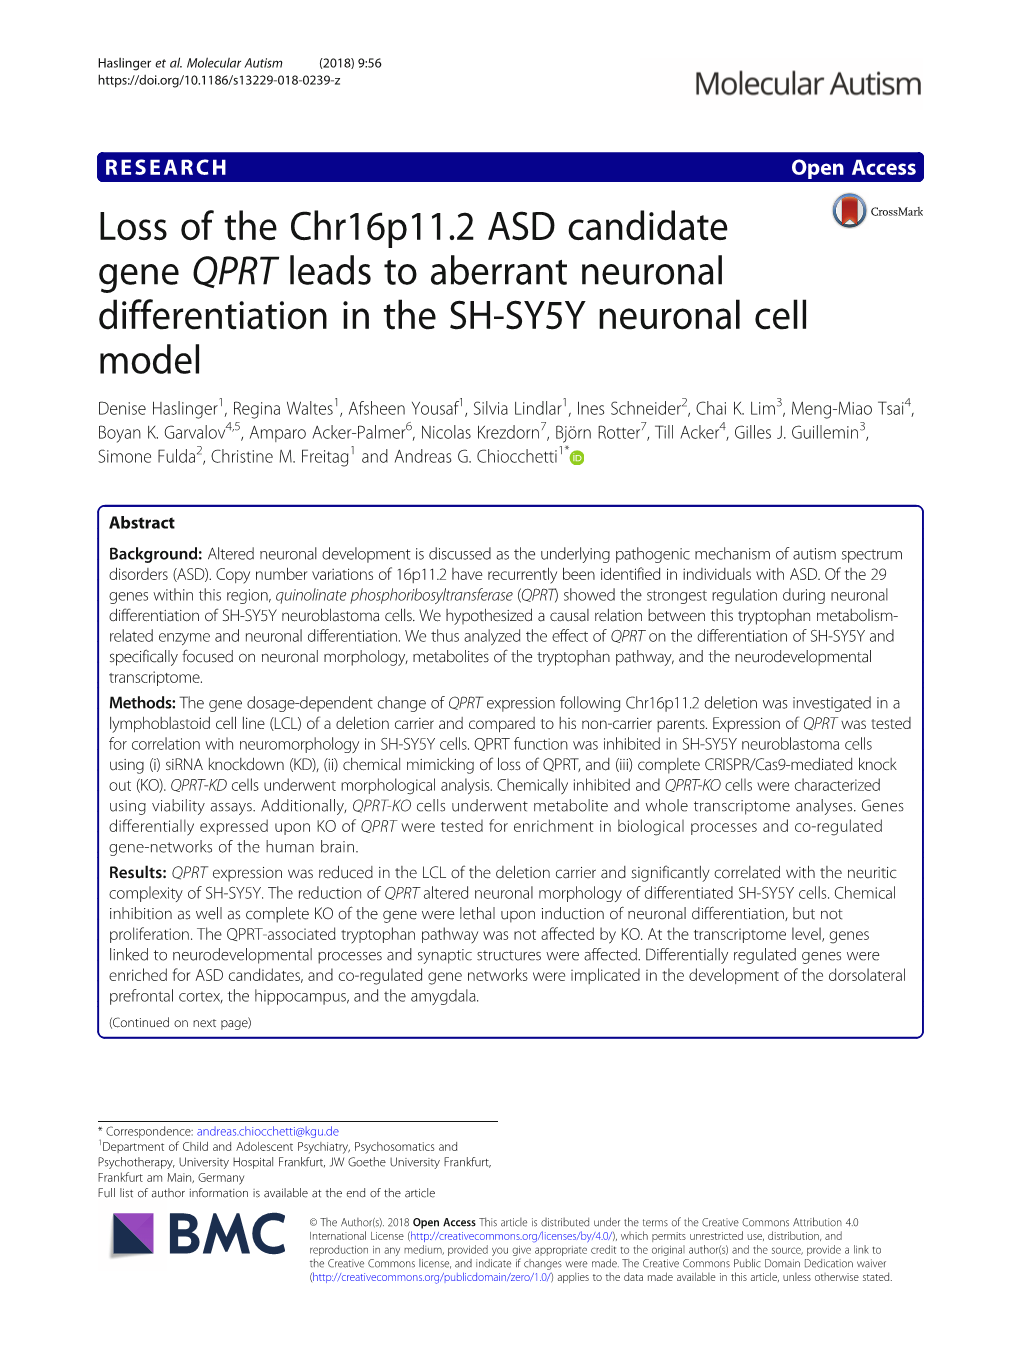 Loss of the Chr16p11.2 ASD Candidate Gene QPRT Leads To